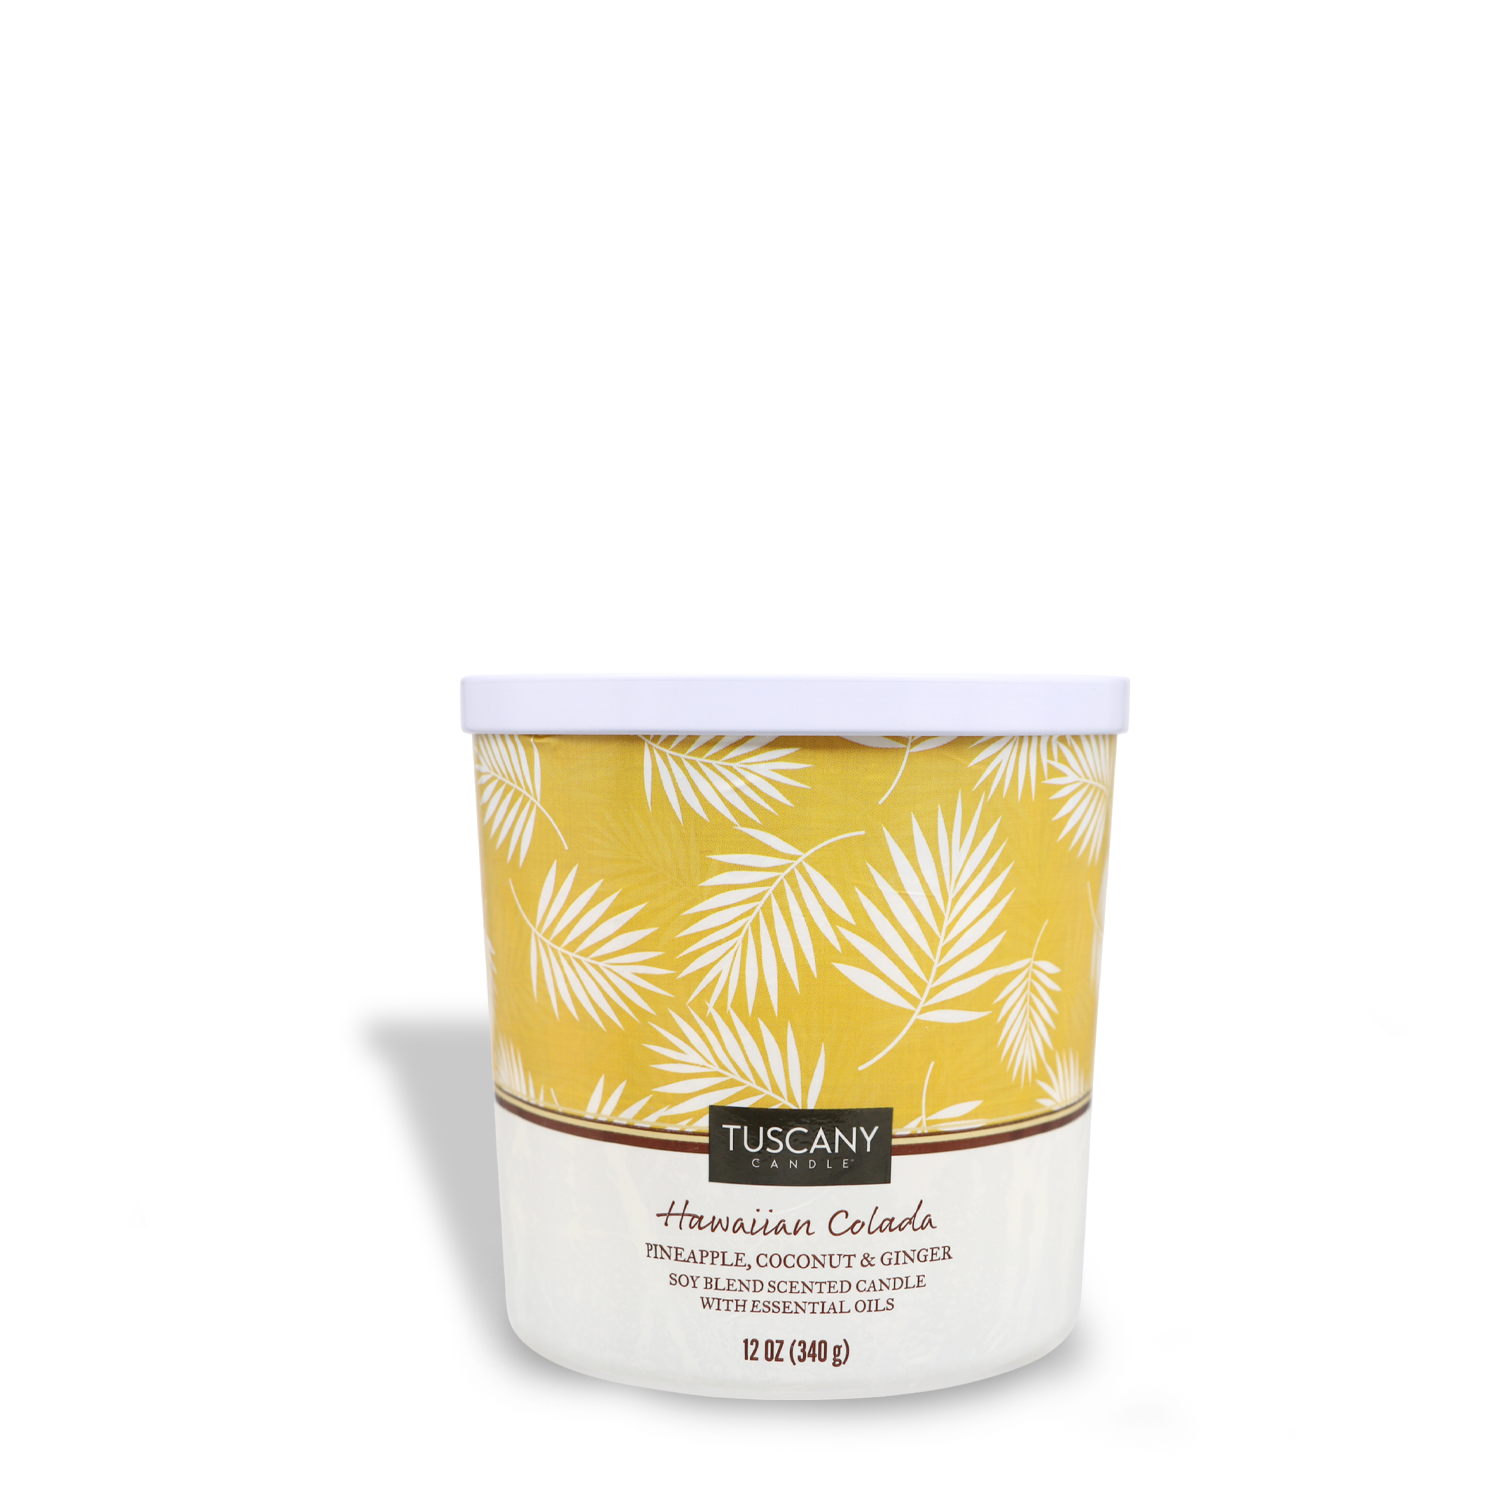 Container of Hawaiian Colada scented candle with pineapple, coconut, and ginger notes from the Tuscany Candle® SEASONAL Island Retreat Collection.